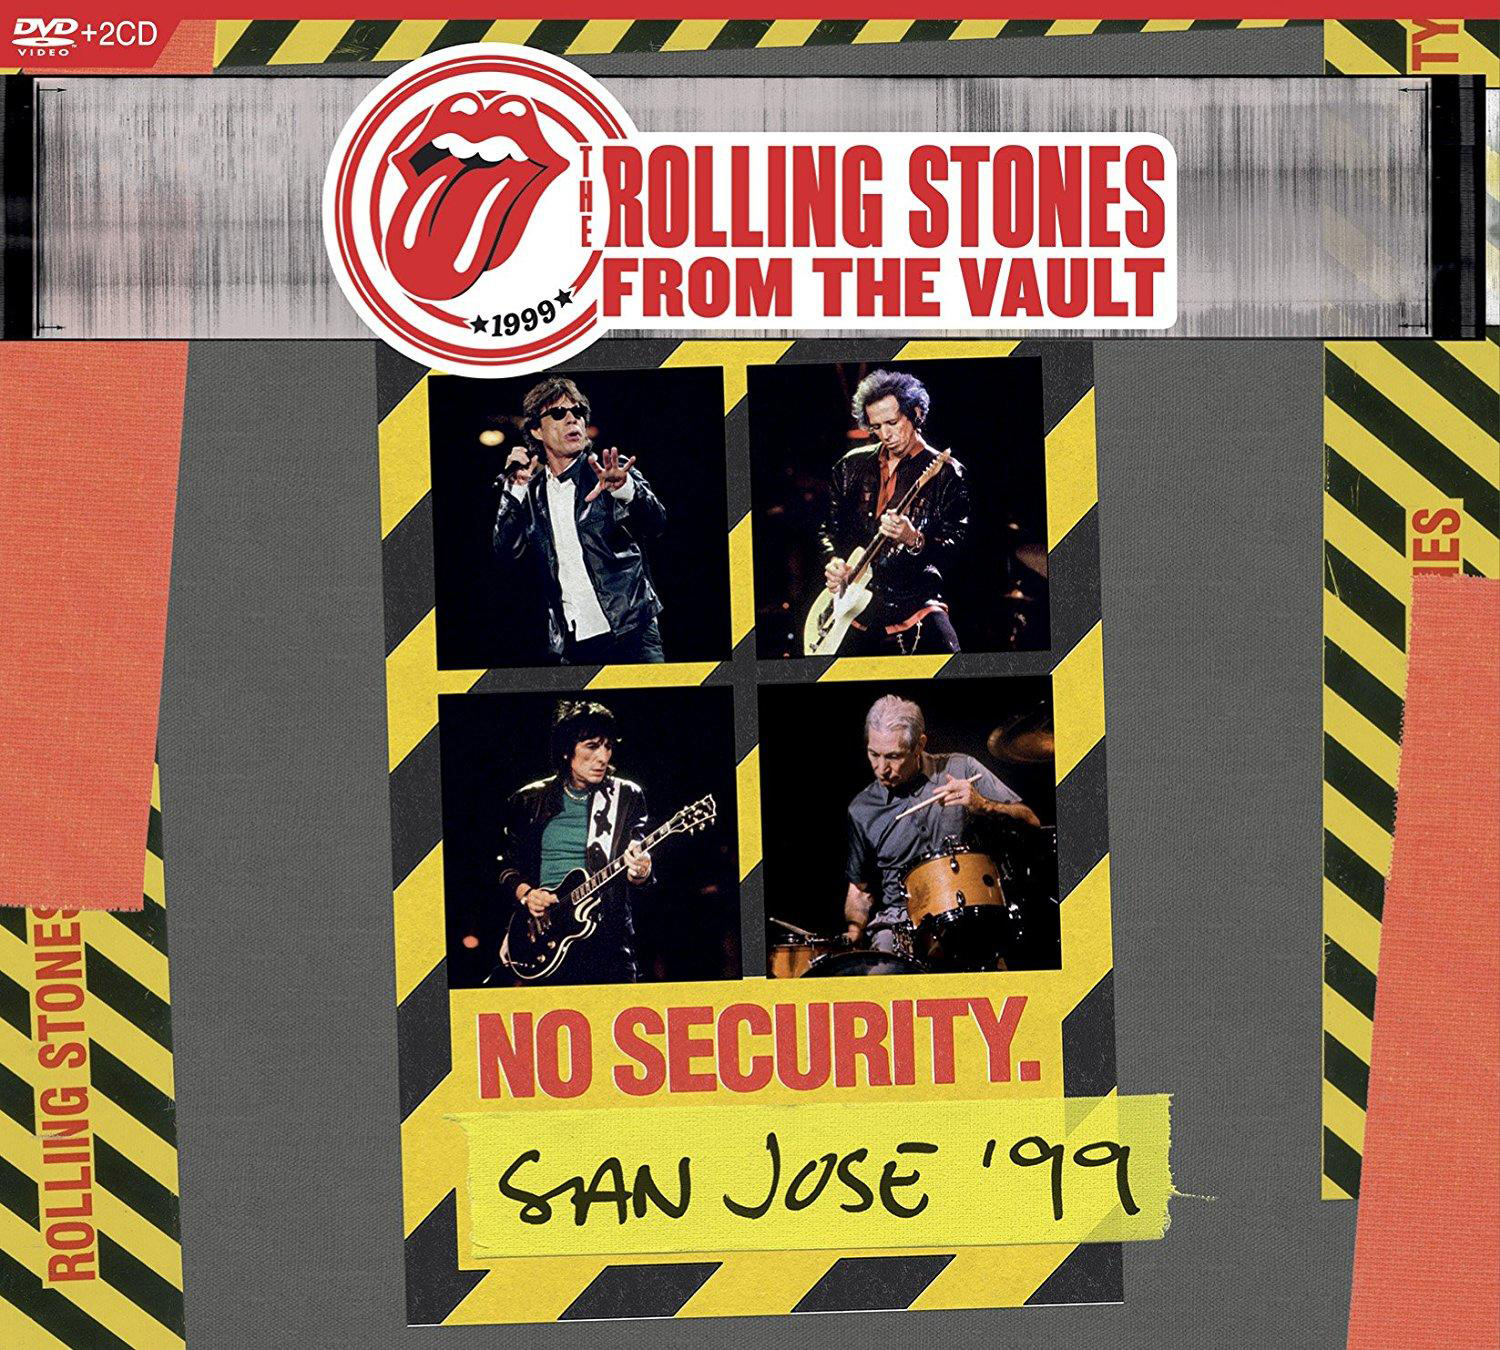 From Security-San (+2CD) - CD) Vault: Rolling Jose (DVD No Stones 1999 The The - +